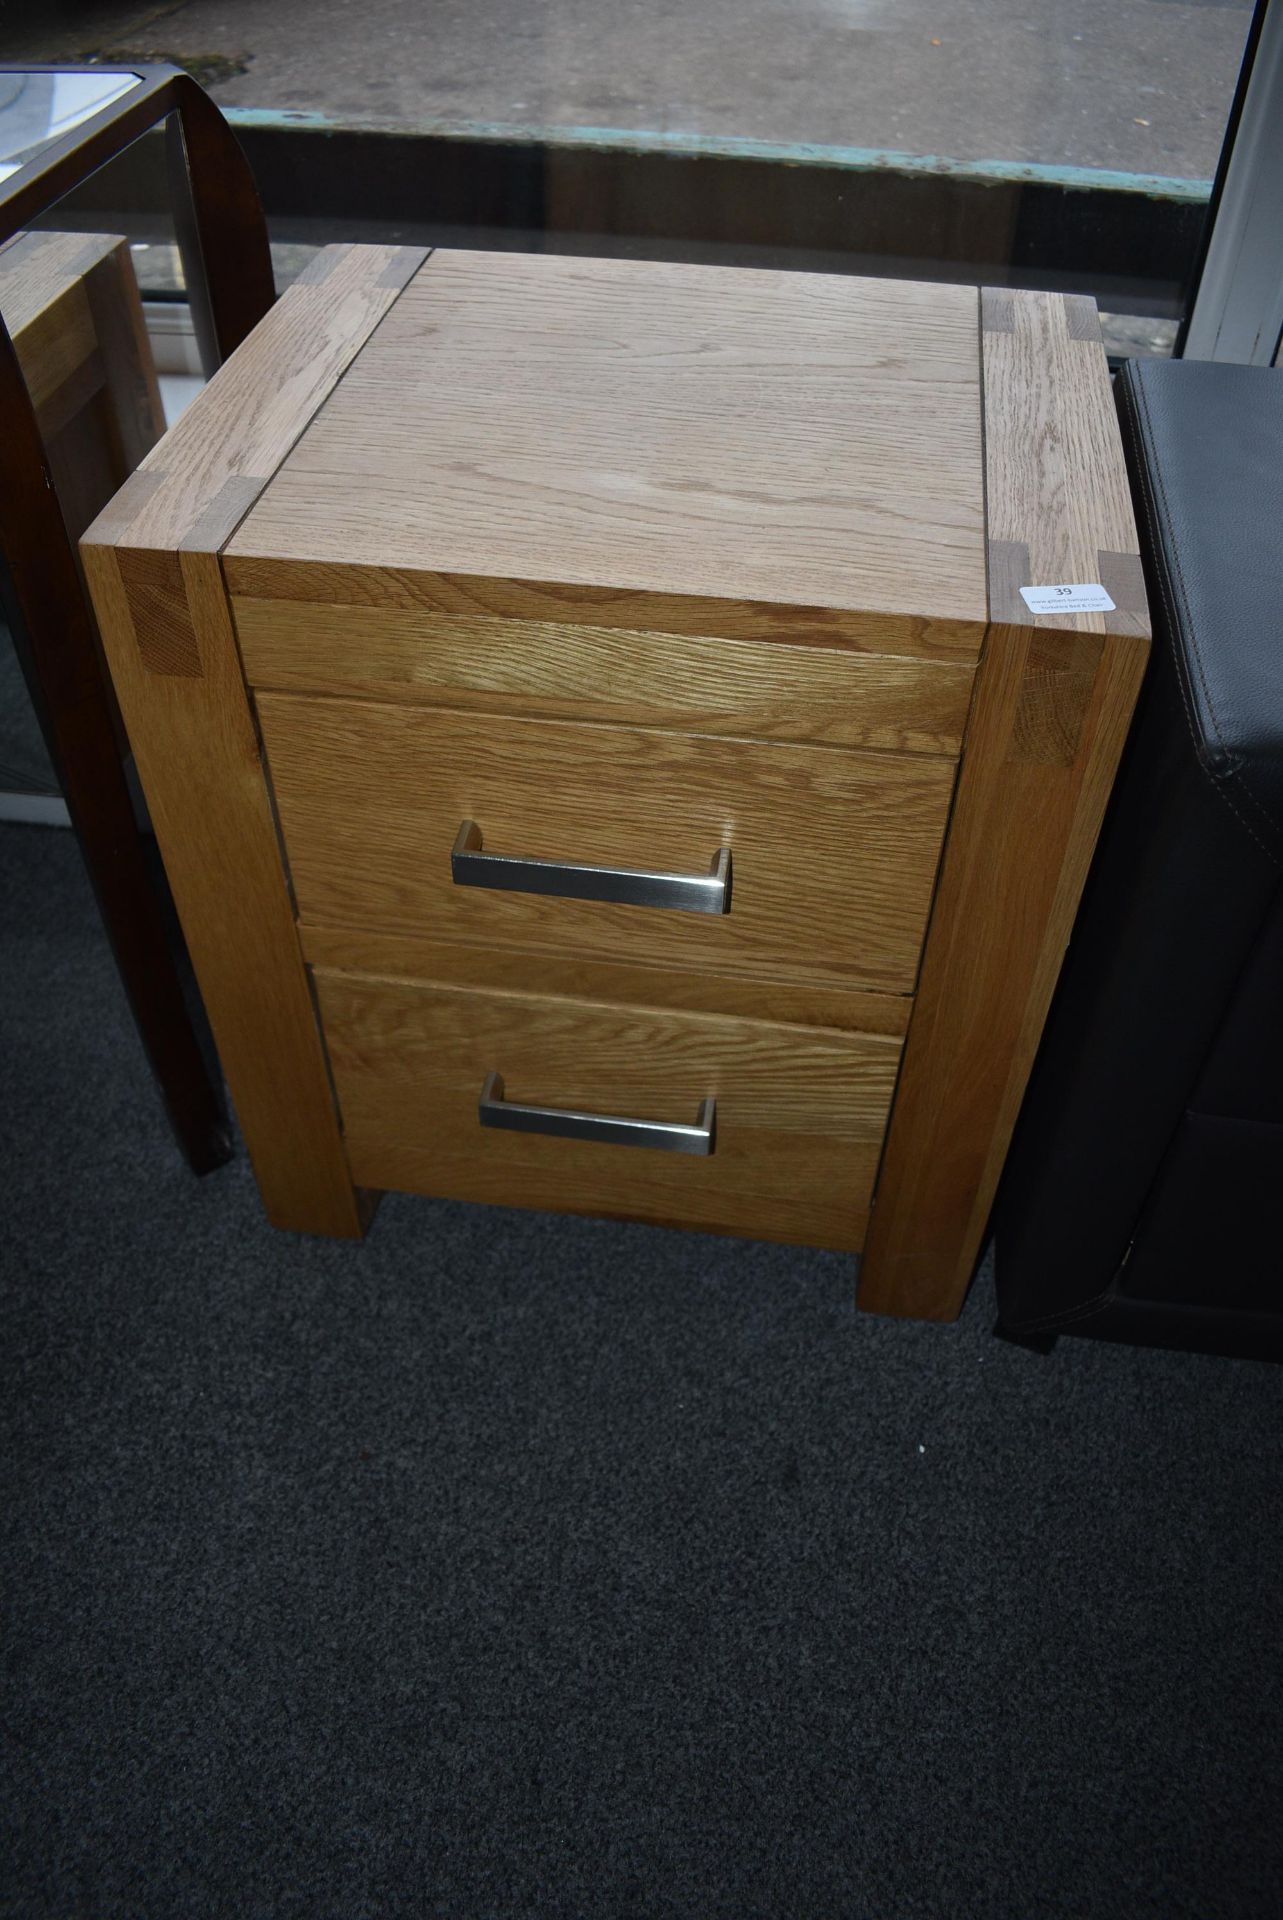 *Pine Effect Two Drawer Bedside Cabinet 16”x19” x 21.5” tall